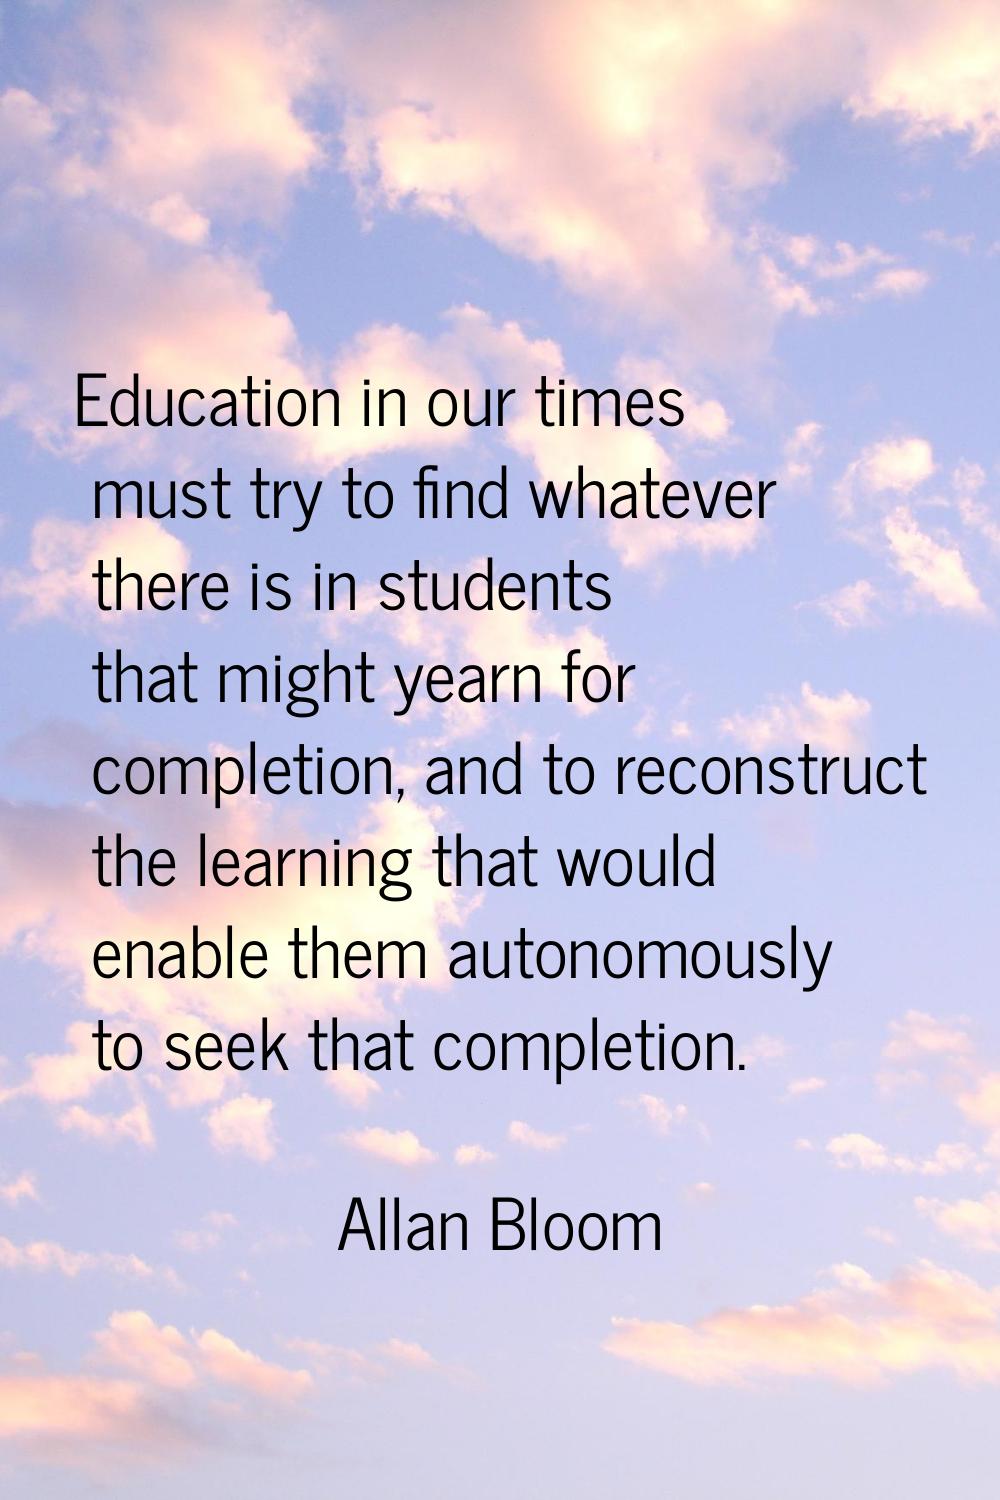 Education in our times must try to find whatever there is in students that might yearn for completi